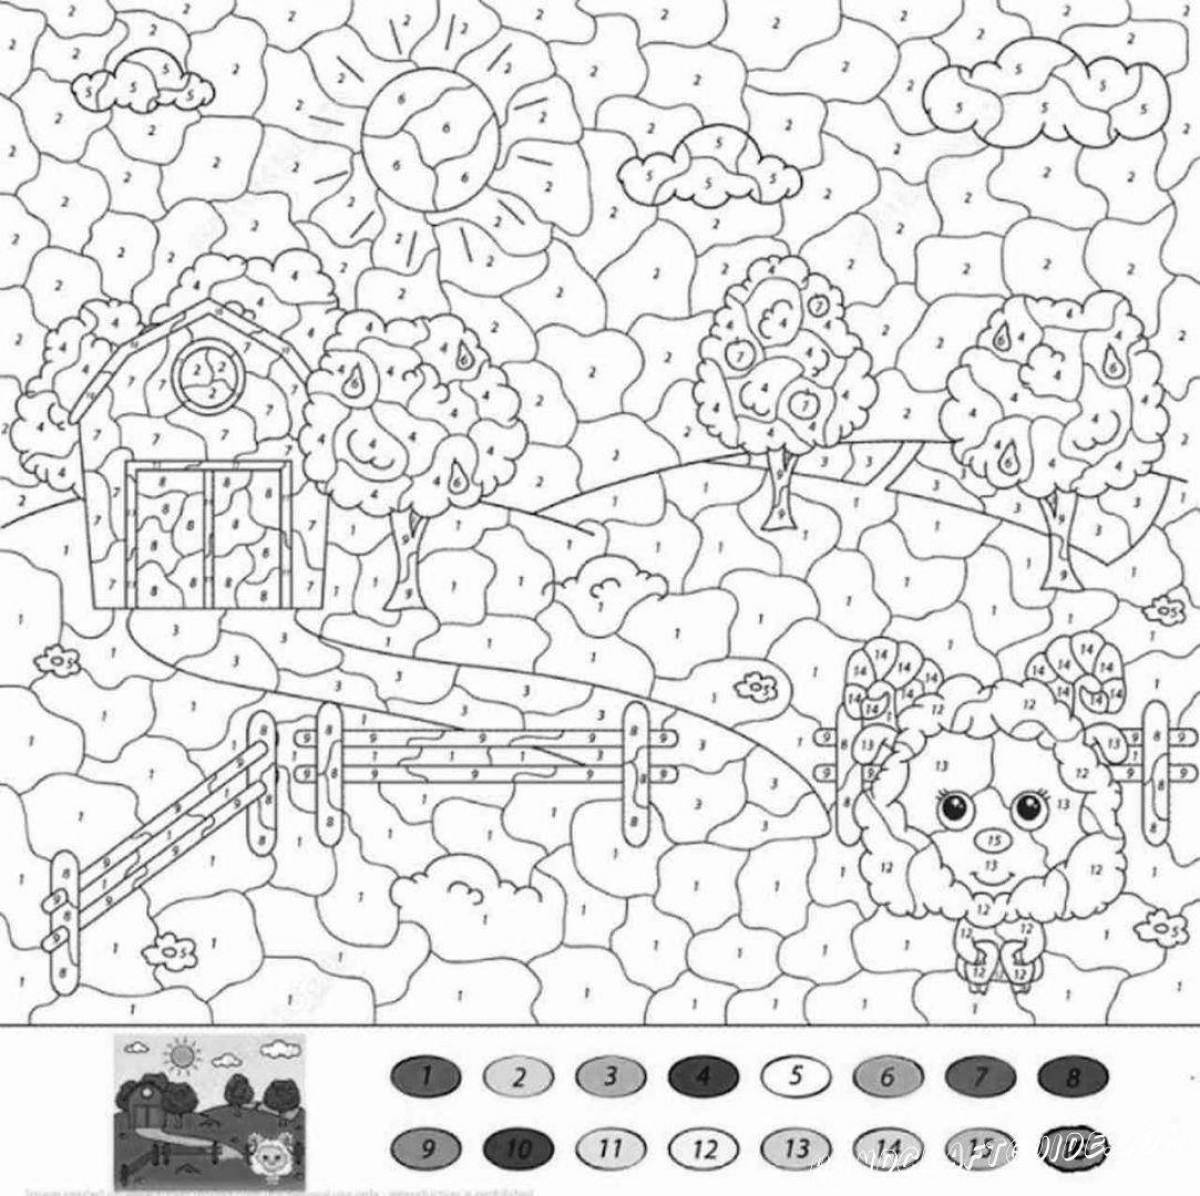 Coloring fun phone games by numbers